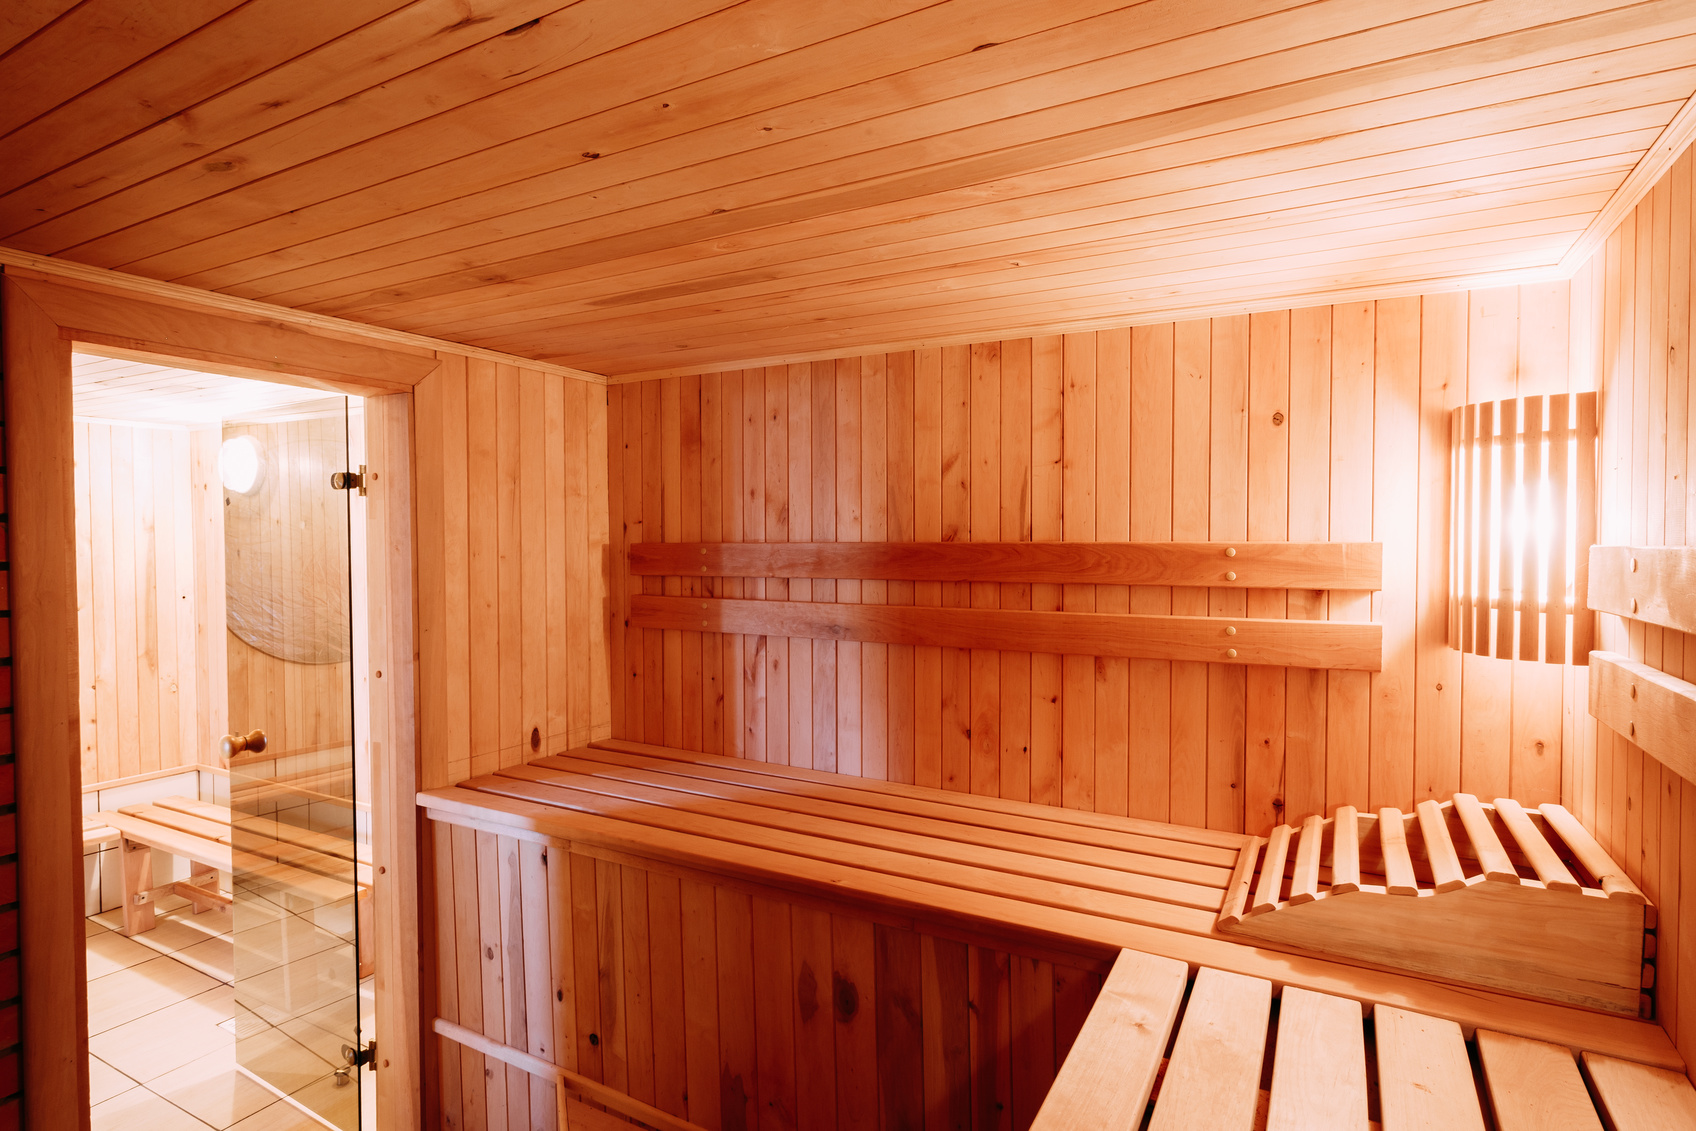 4 Reasons To Try An Infrared Sauna